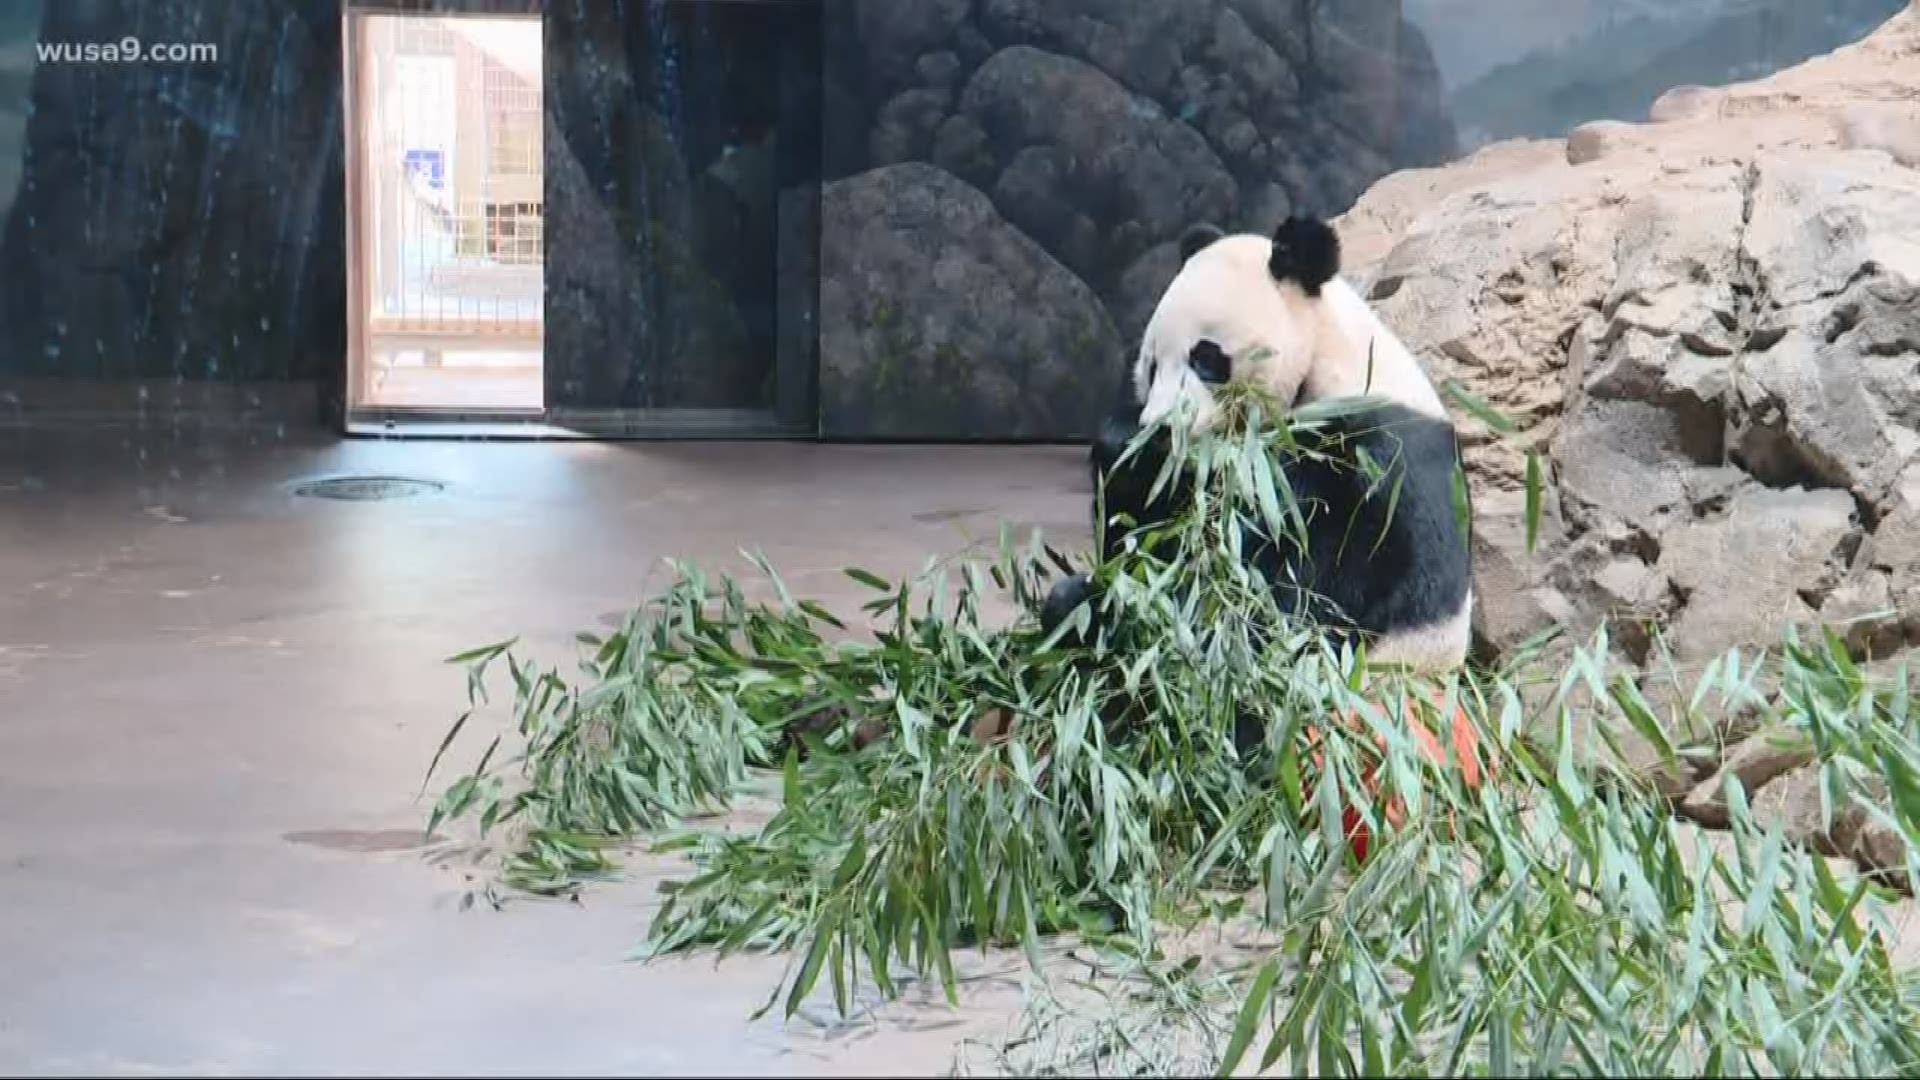 A 4-year-old giant panda, Bei Bei, will be leaving the Smithsonian’s National Zoo on November 19.